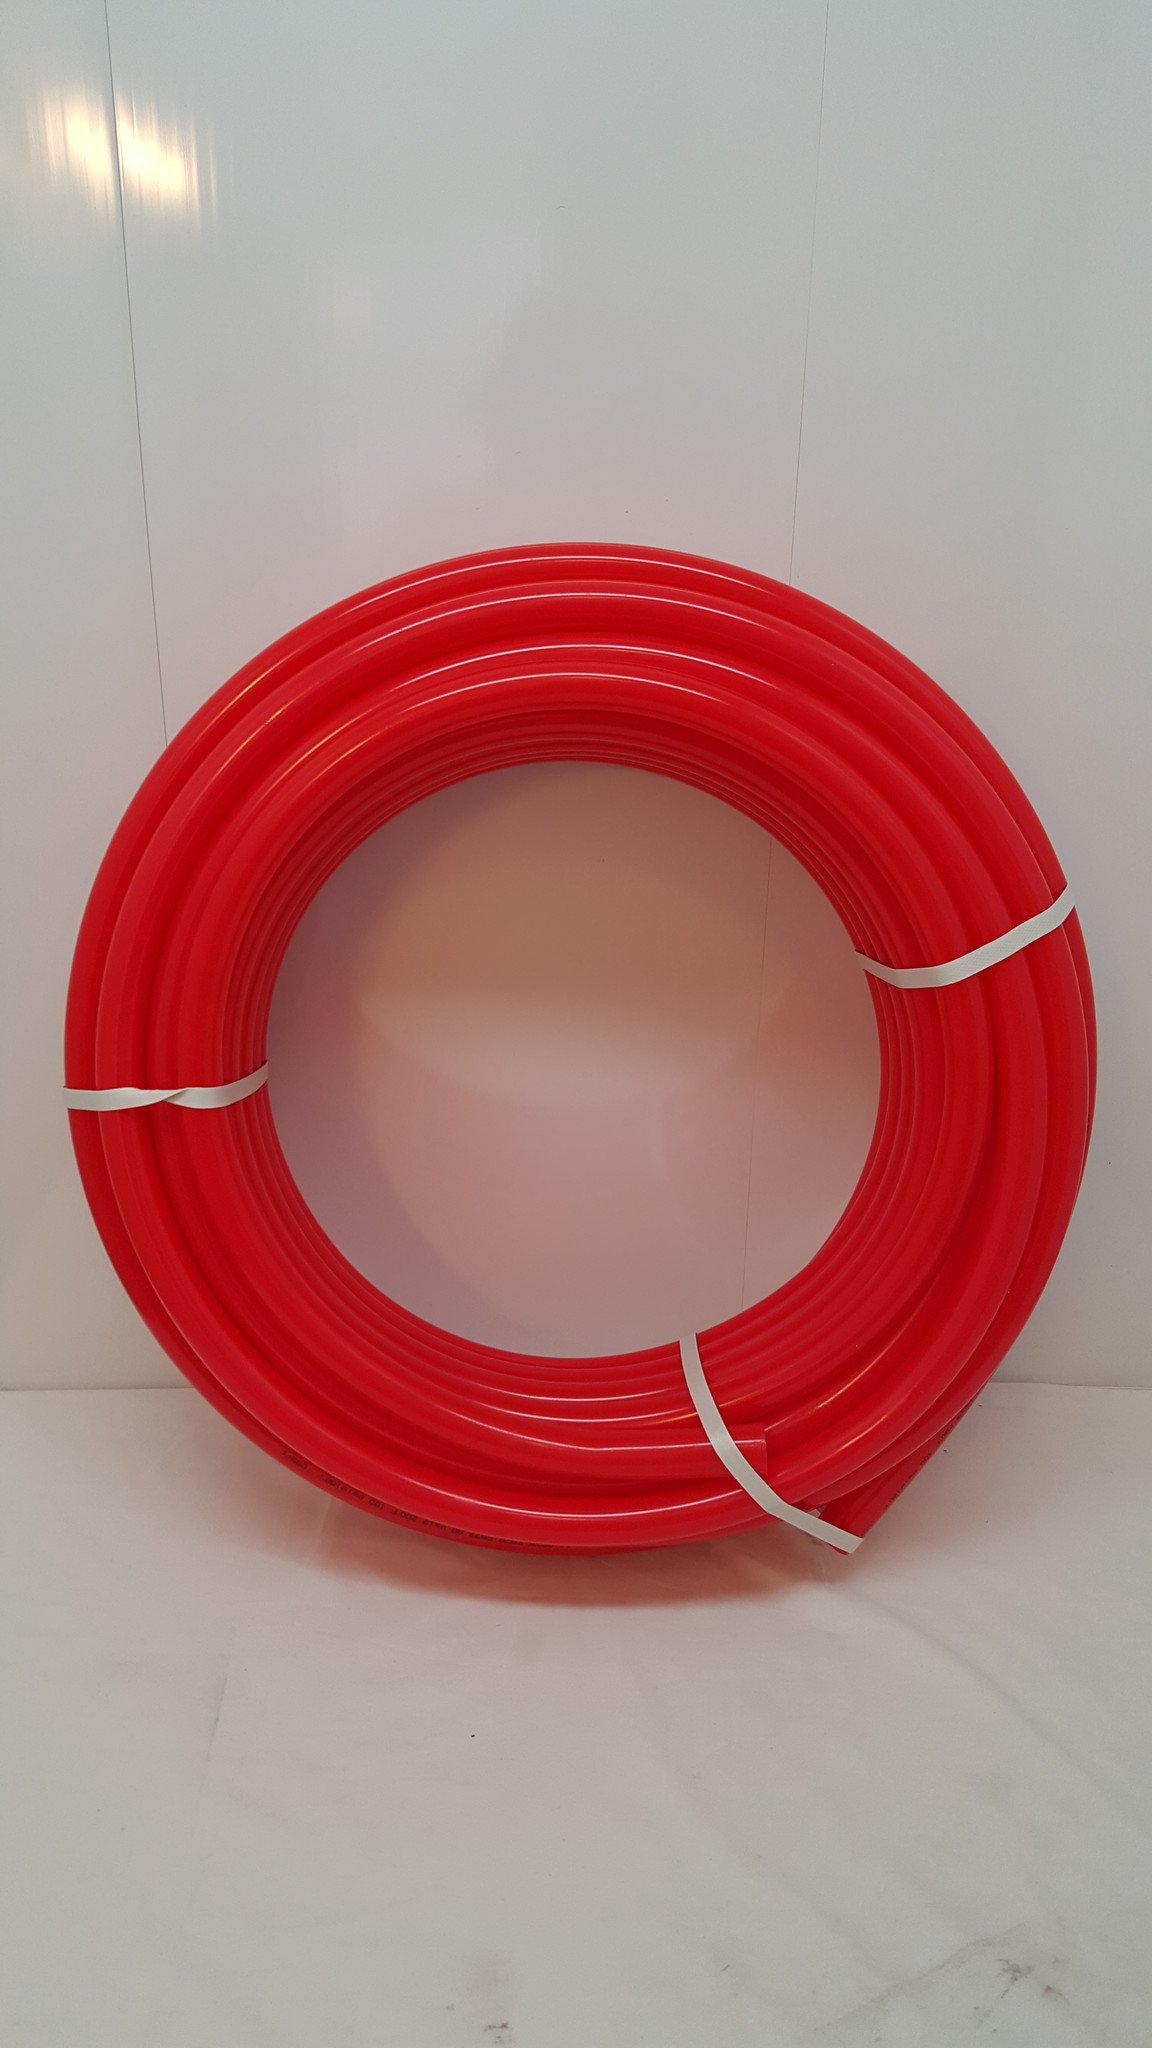 100' 1 1/4" Non-Oxygen Barrier Blue PEX tubing for heating and plumbing 